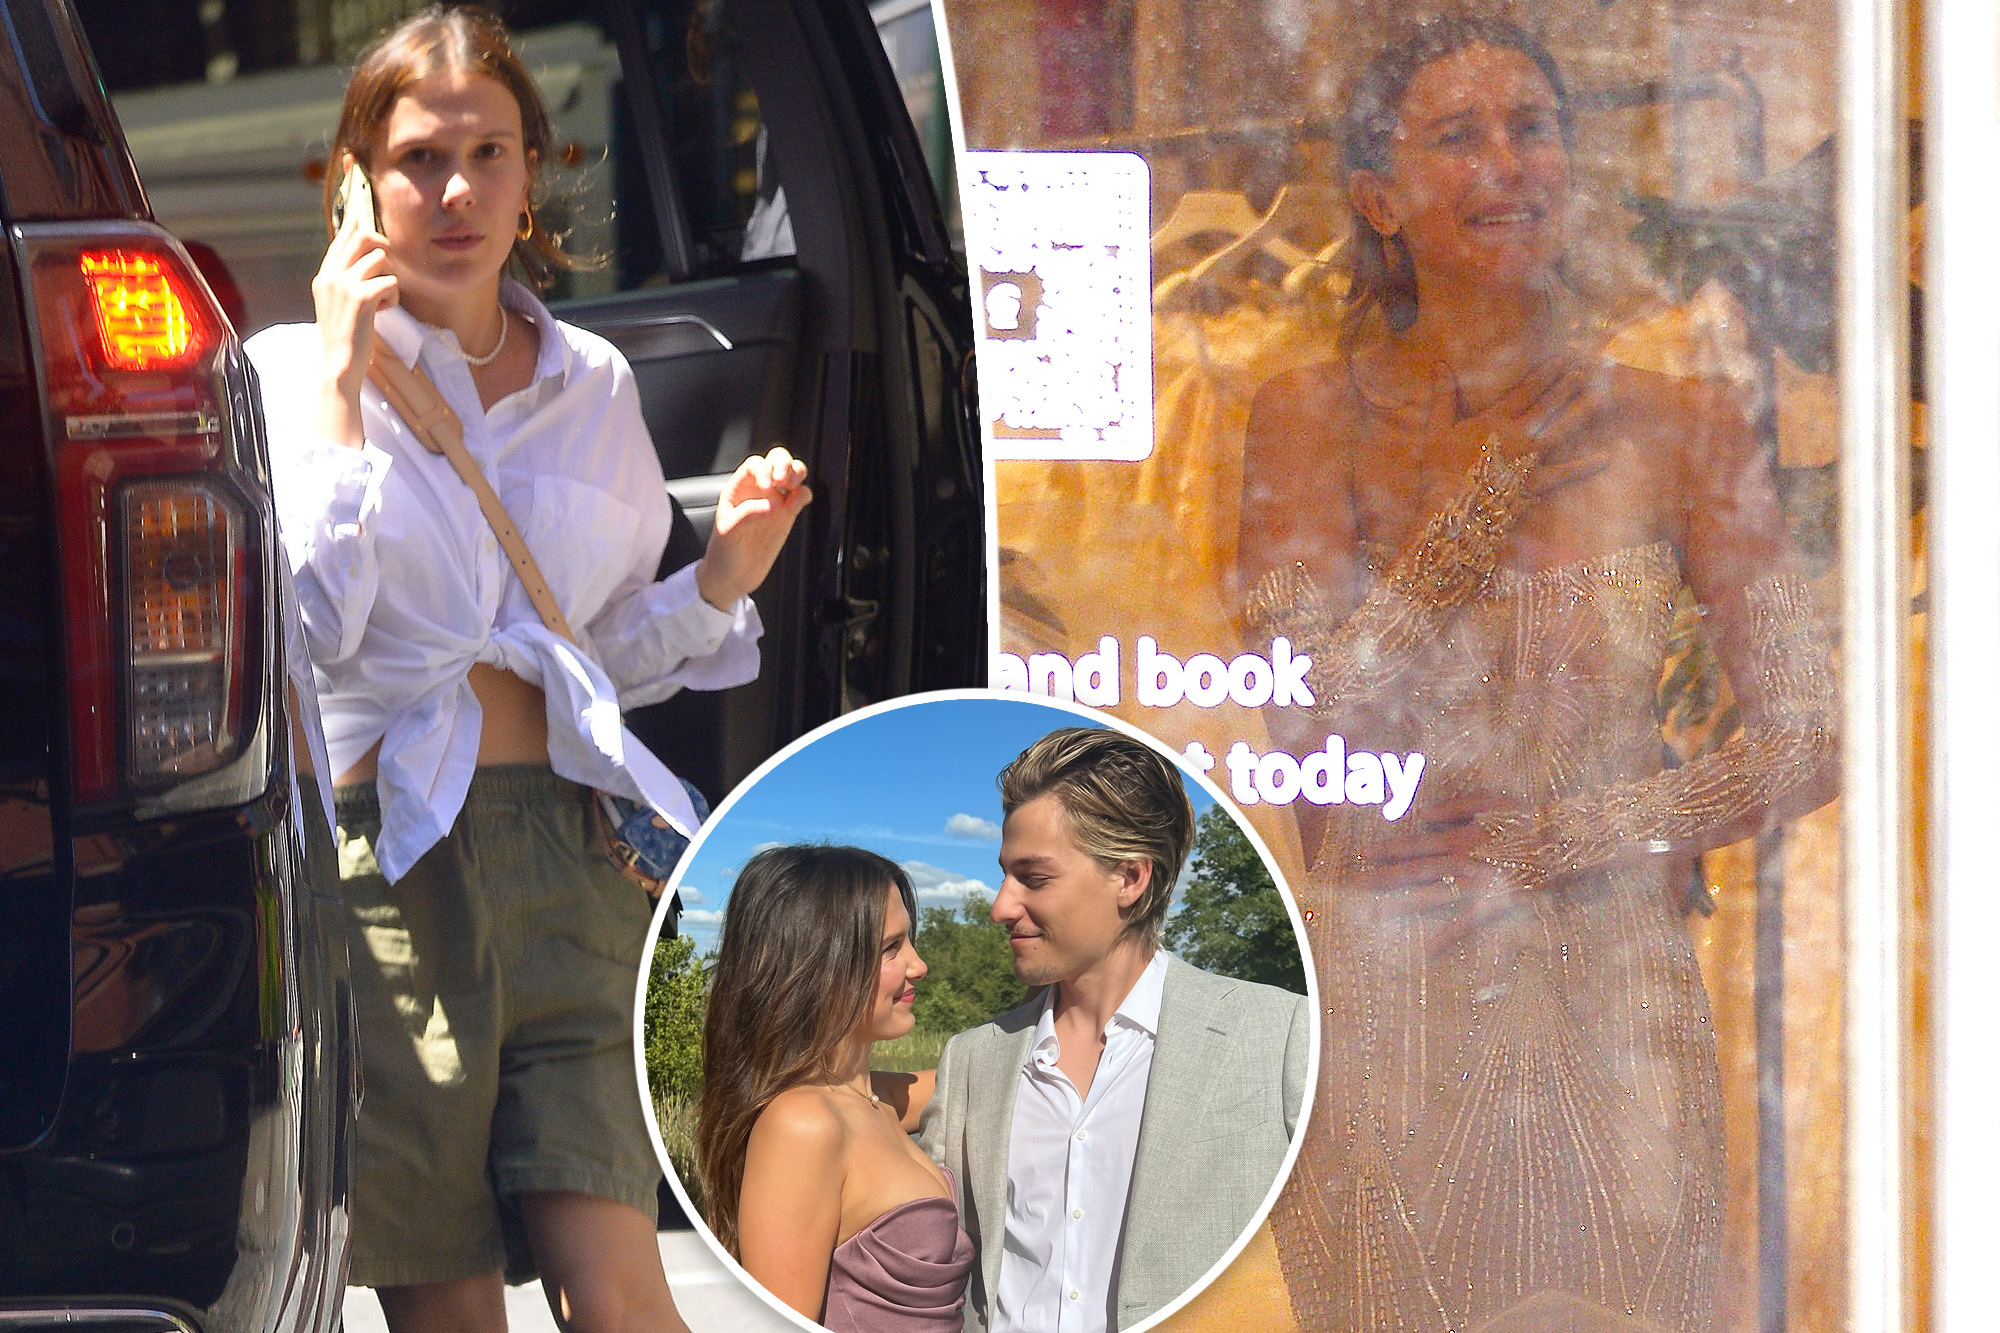 Millie Bobby Brown's Wedding Dress Shopping Spree in NYC Sparks Excitement